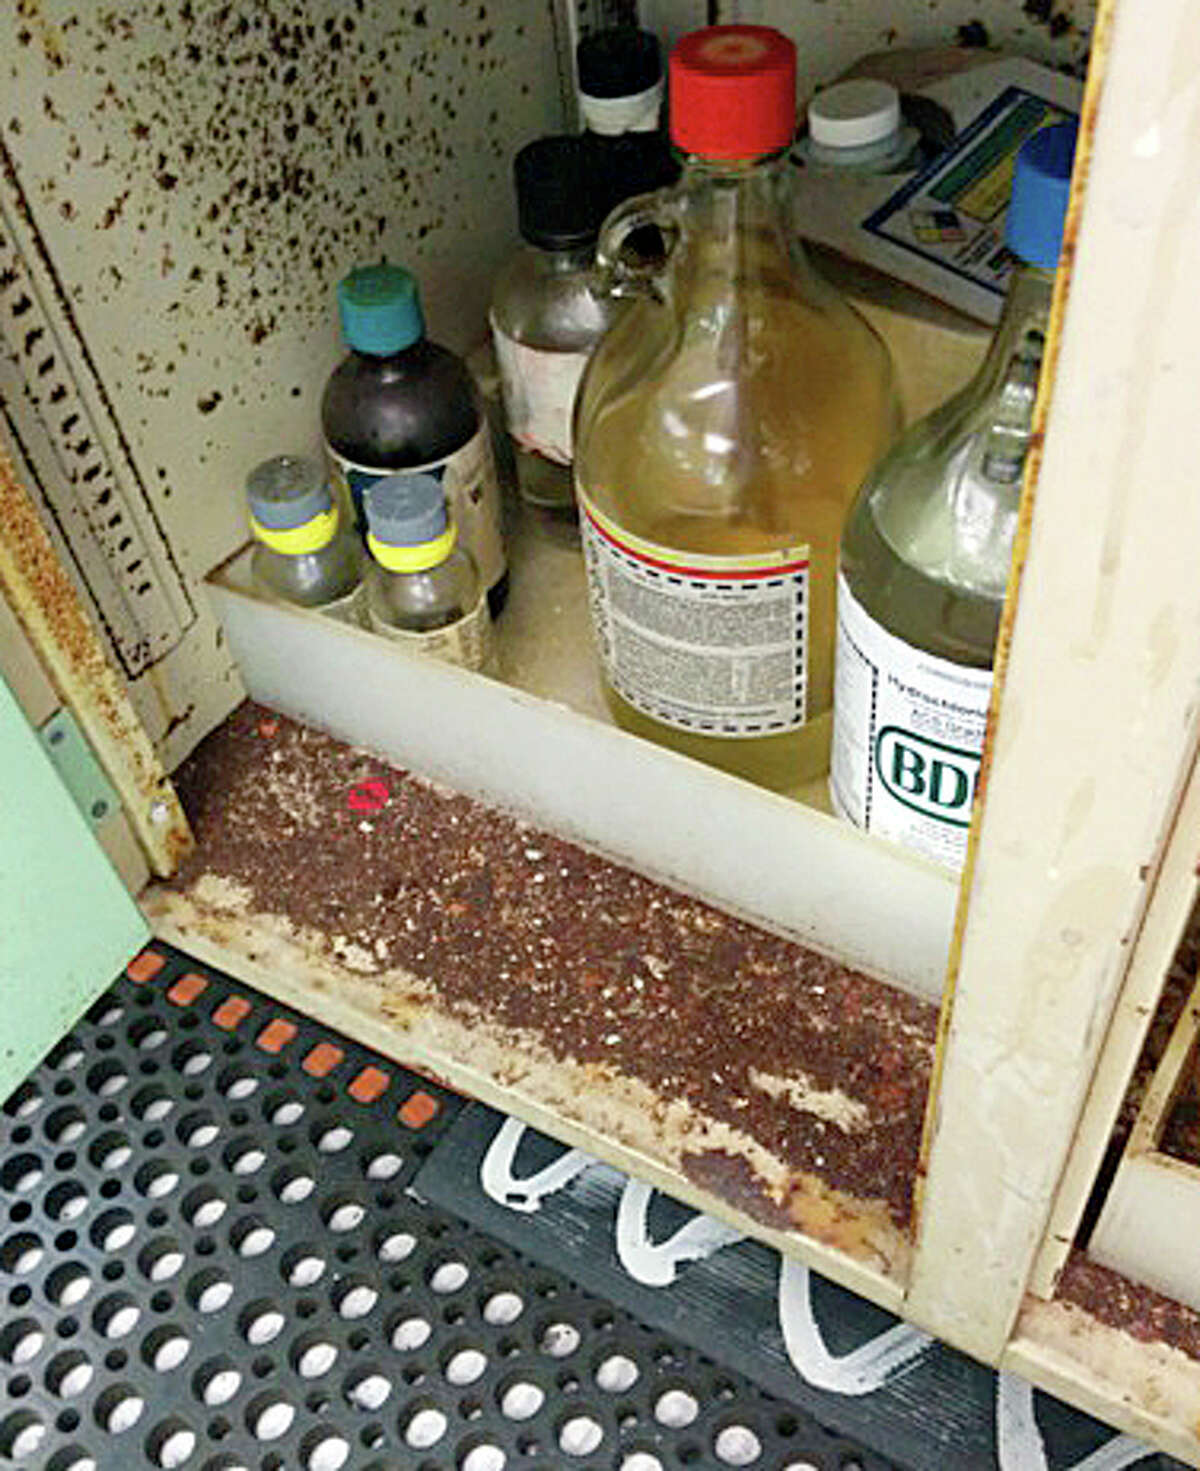 This acid storage cabinet was pitted with rust, which also had collected inside it when a DuPont La Porte process lab was toured last year. One former lab technician said she filed written complaints about the conditions for five years, with no results.